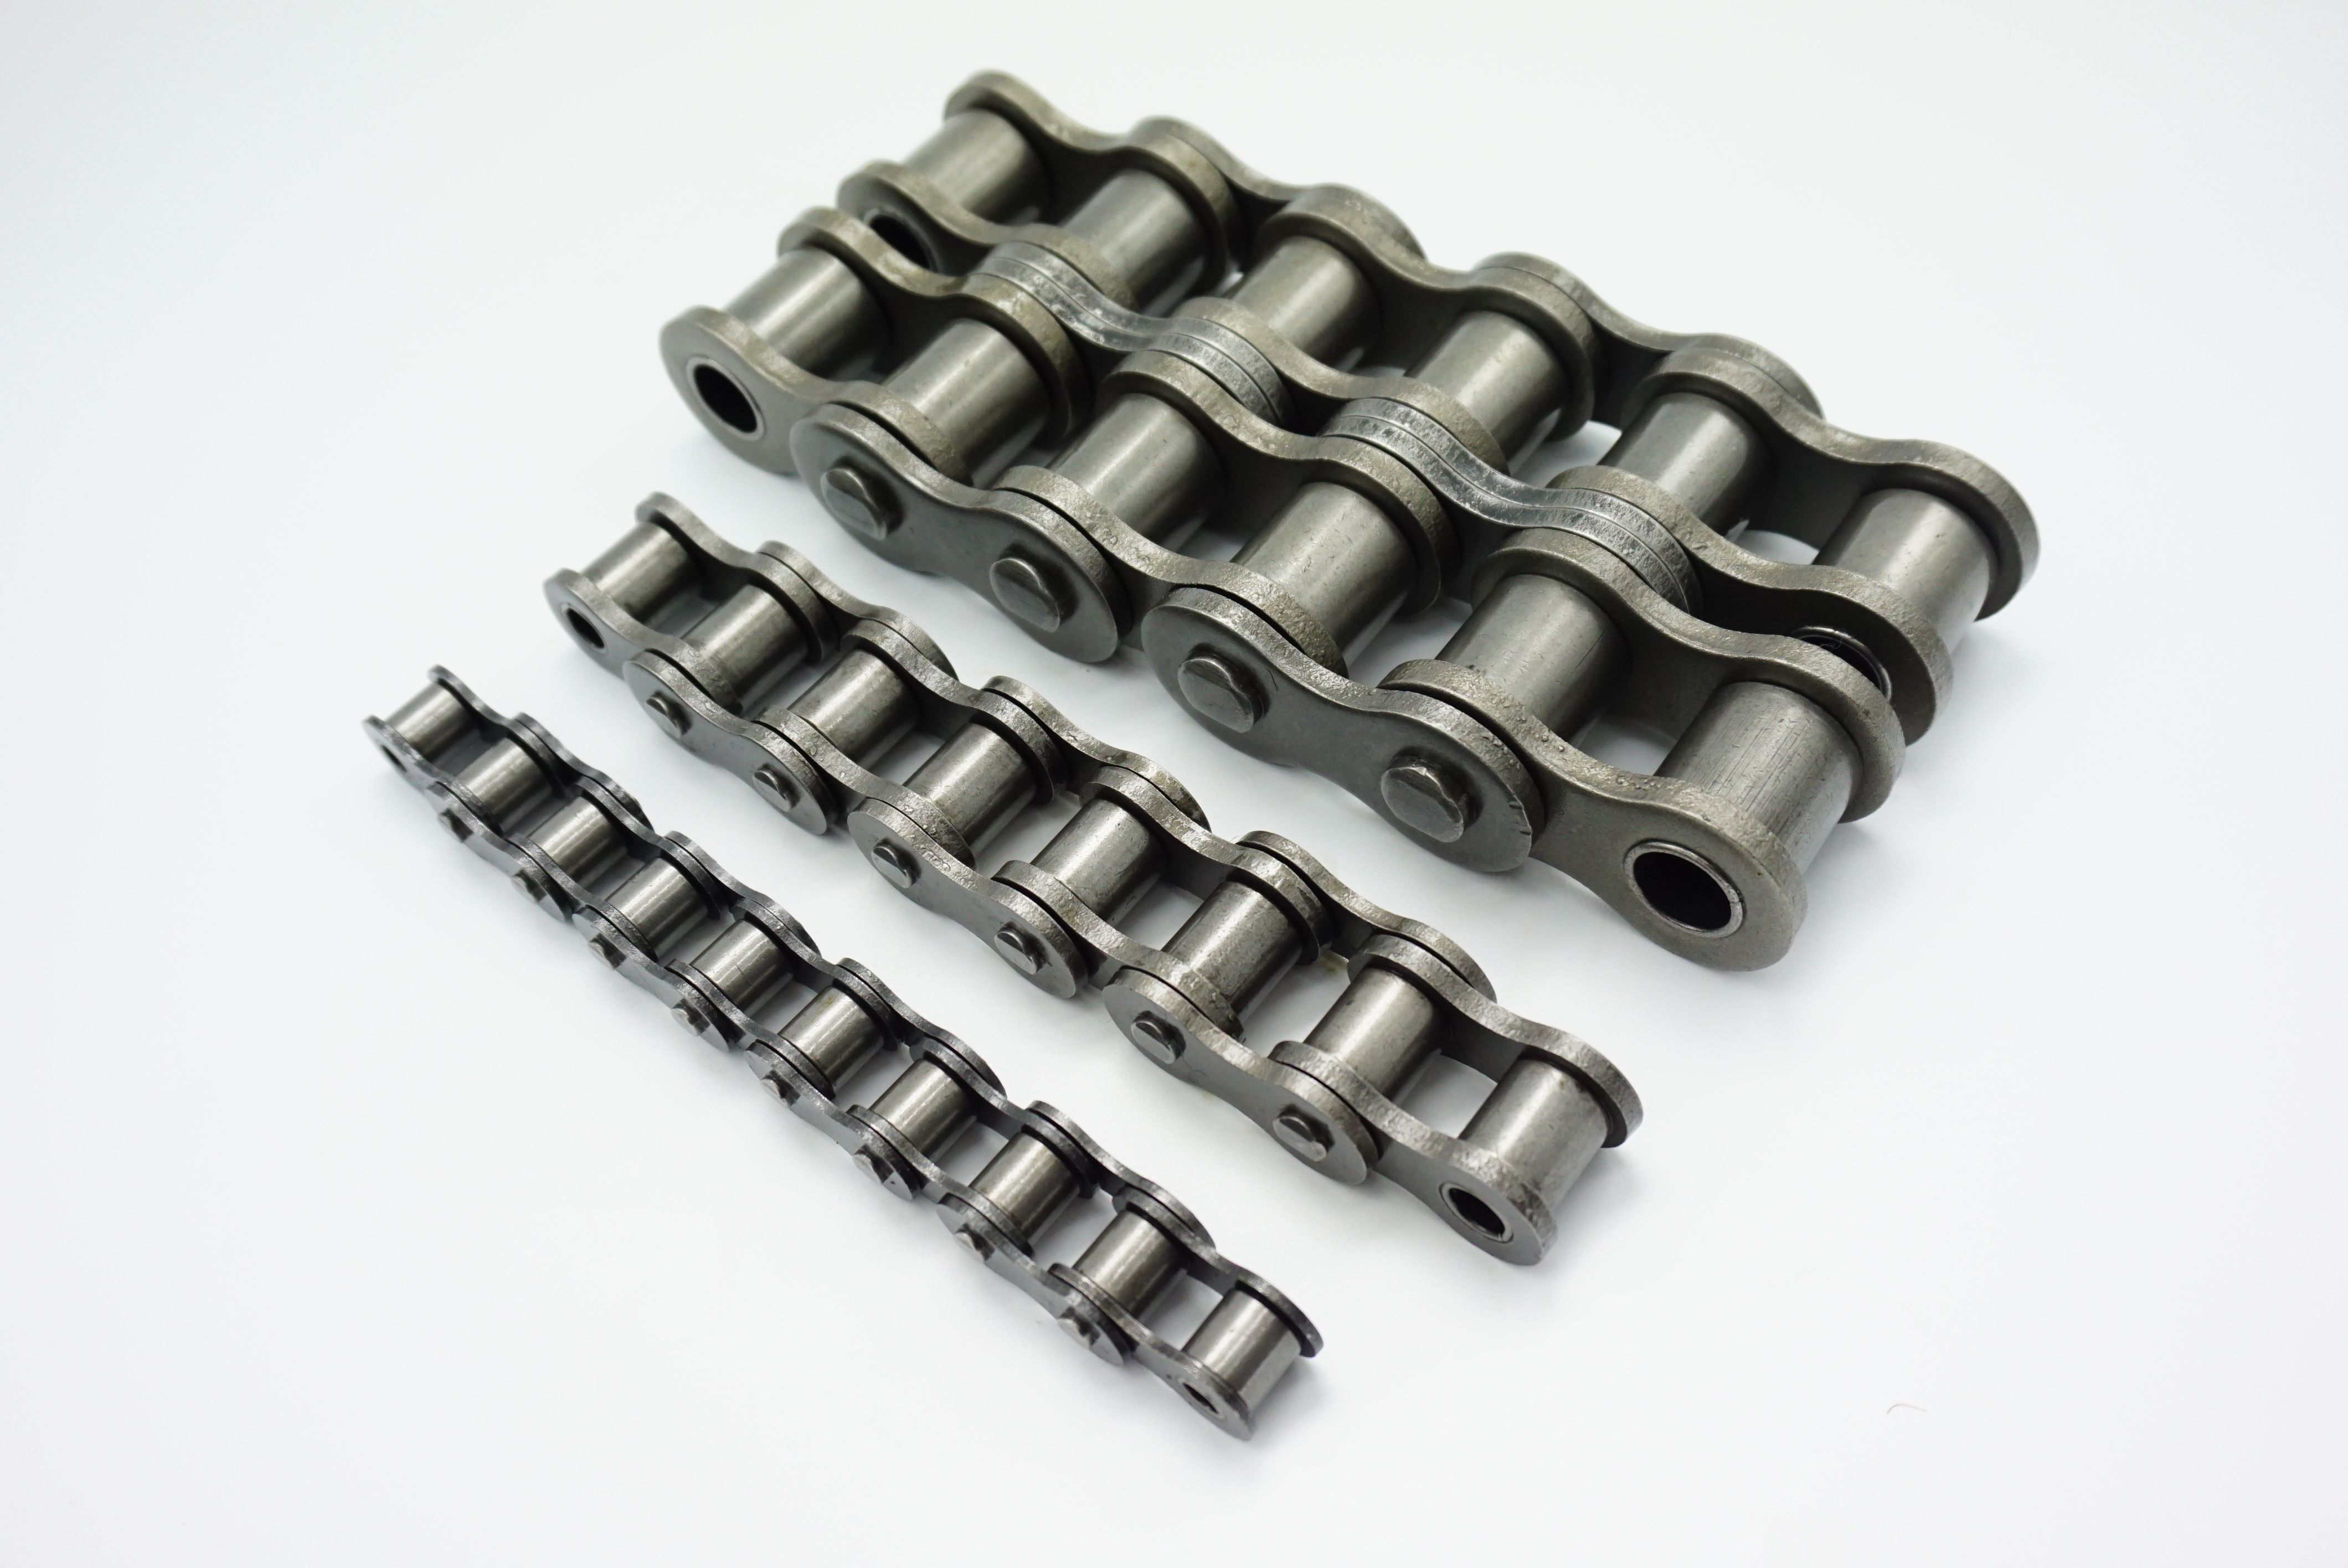 How to adjust the bicycle chain?